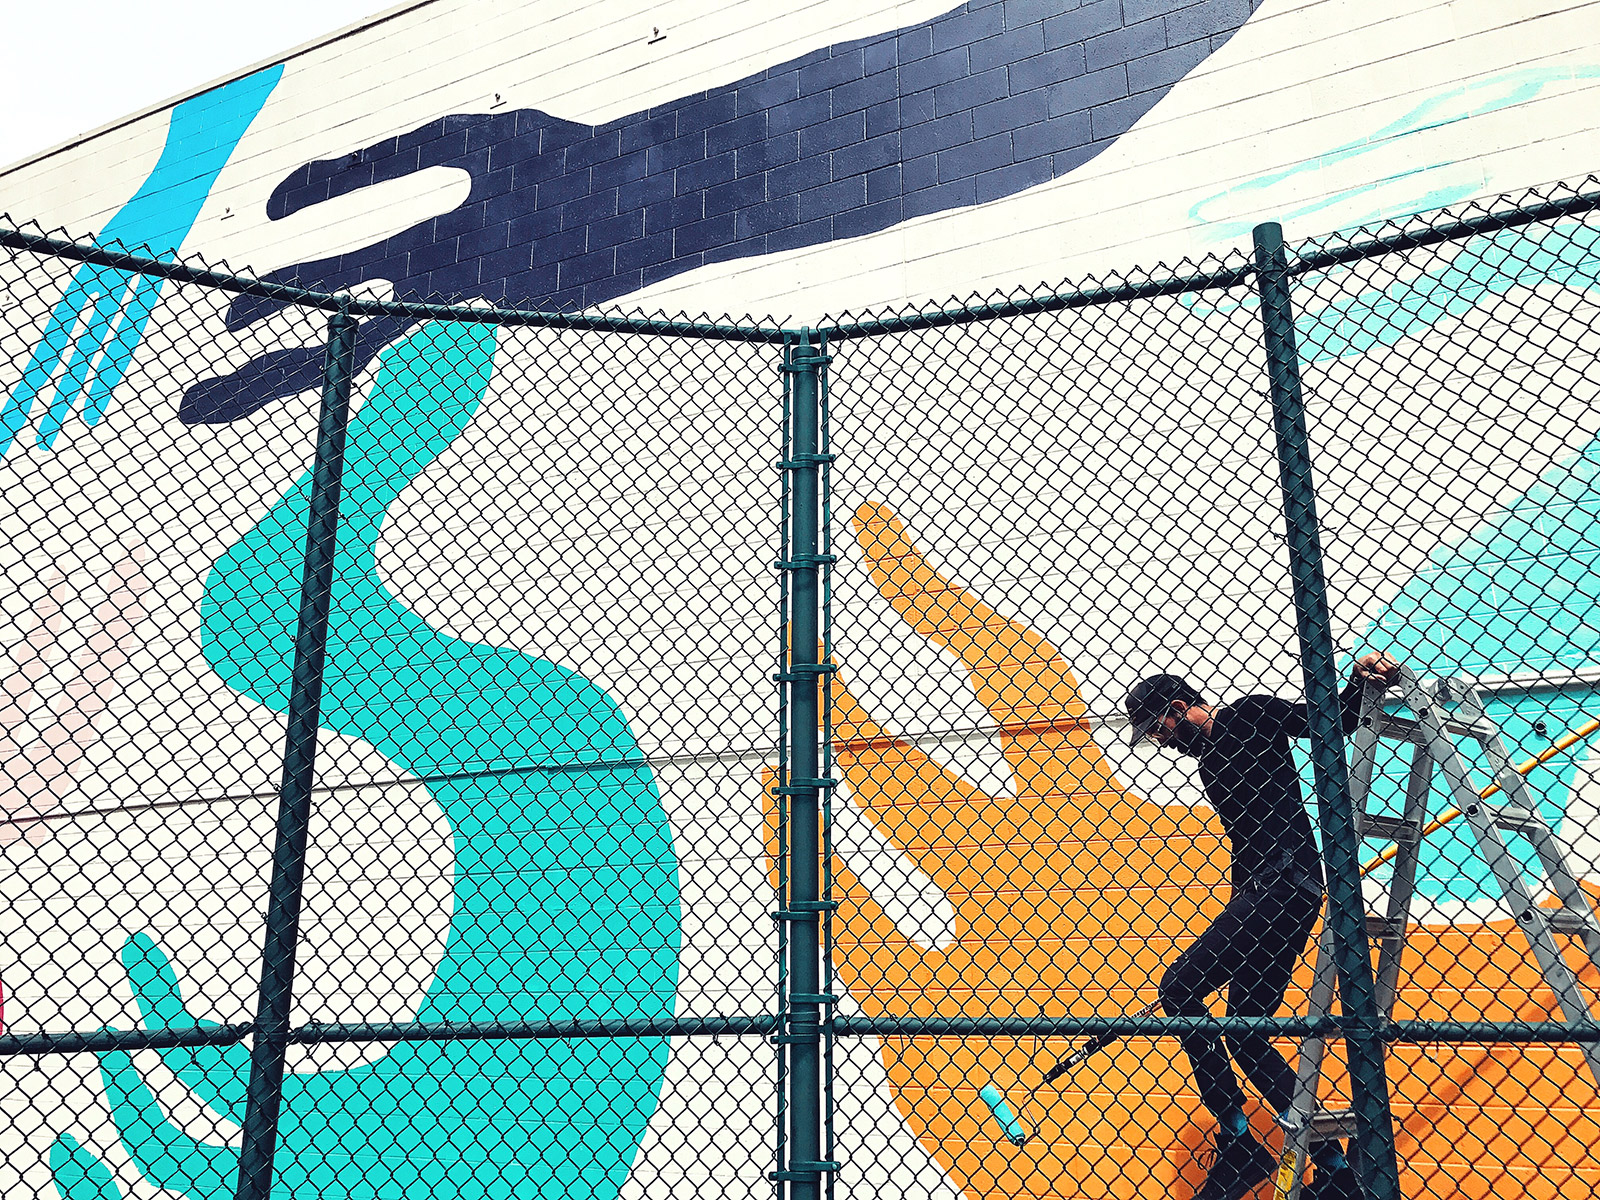 Incredible Large Scale Mural design by Kyle Steed